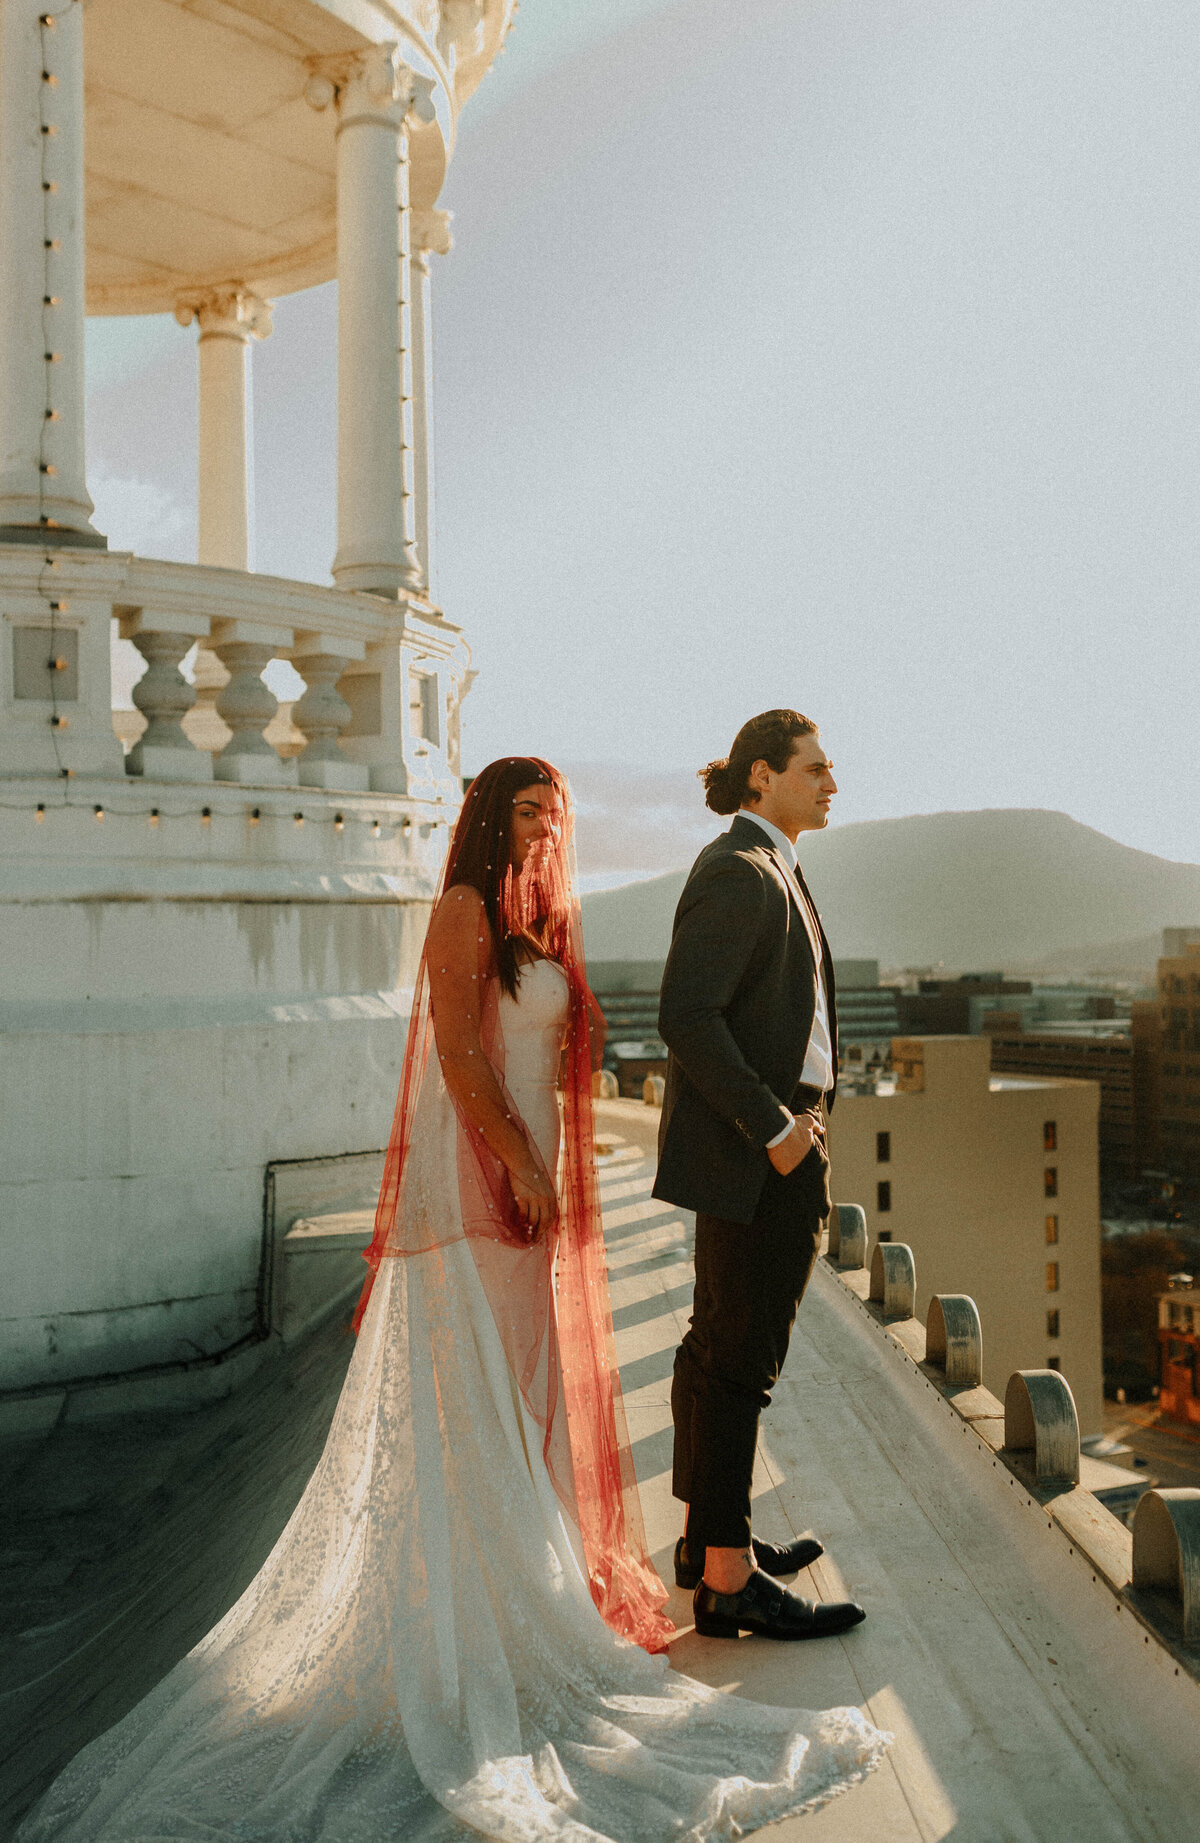 Bride in Red Veil on Rooftop with Mountains